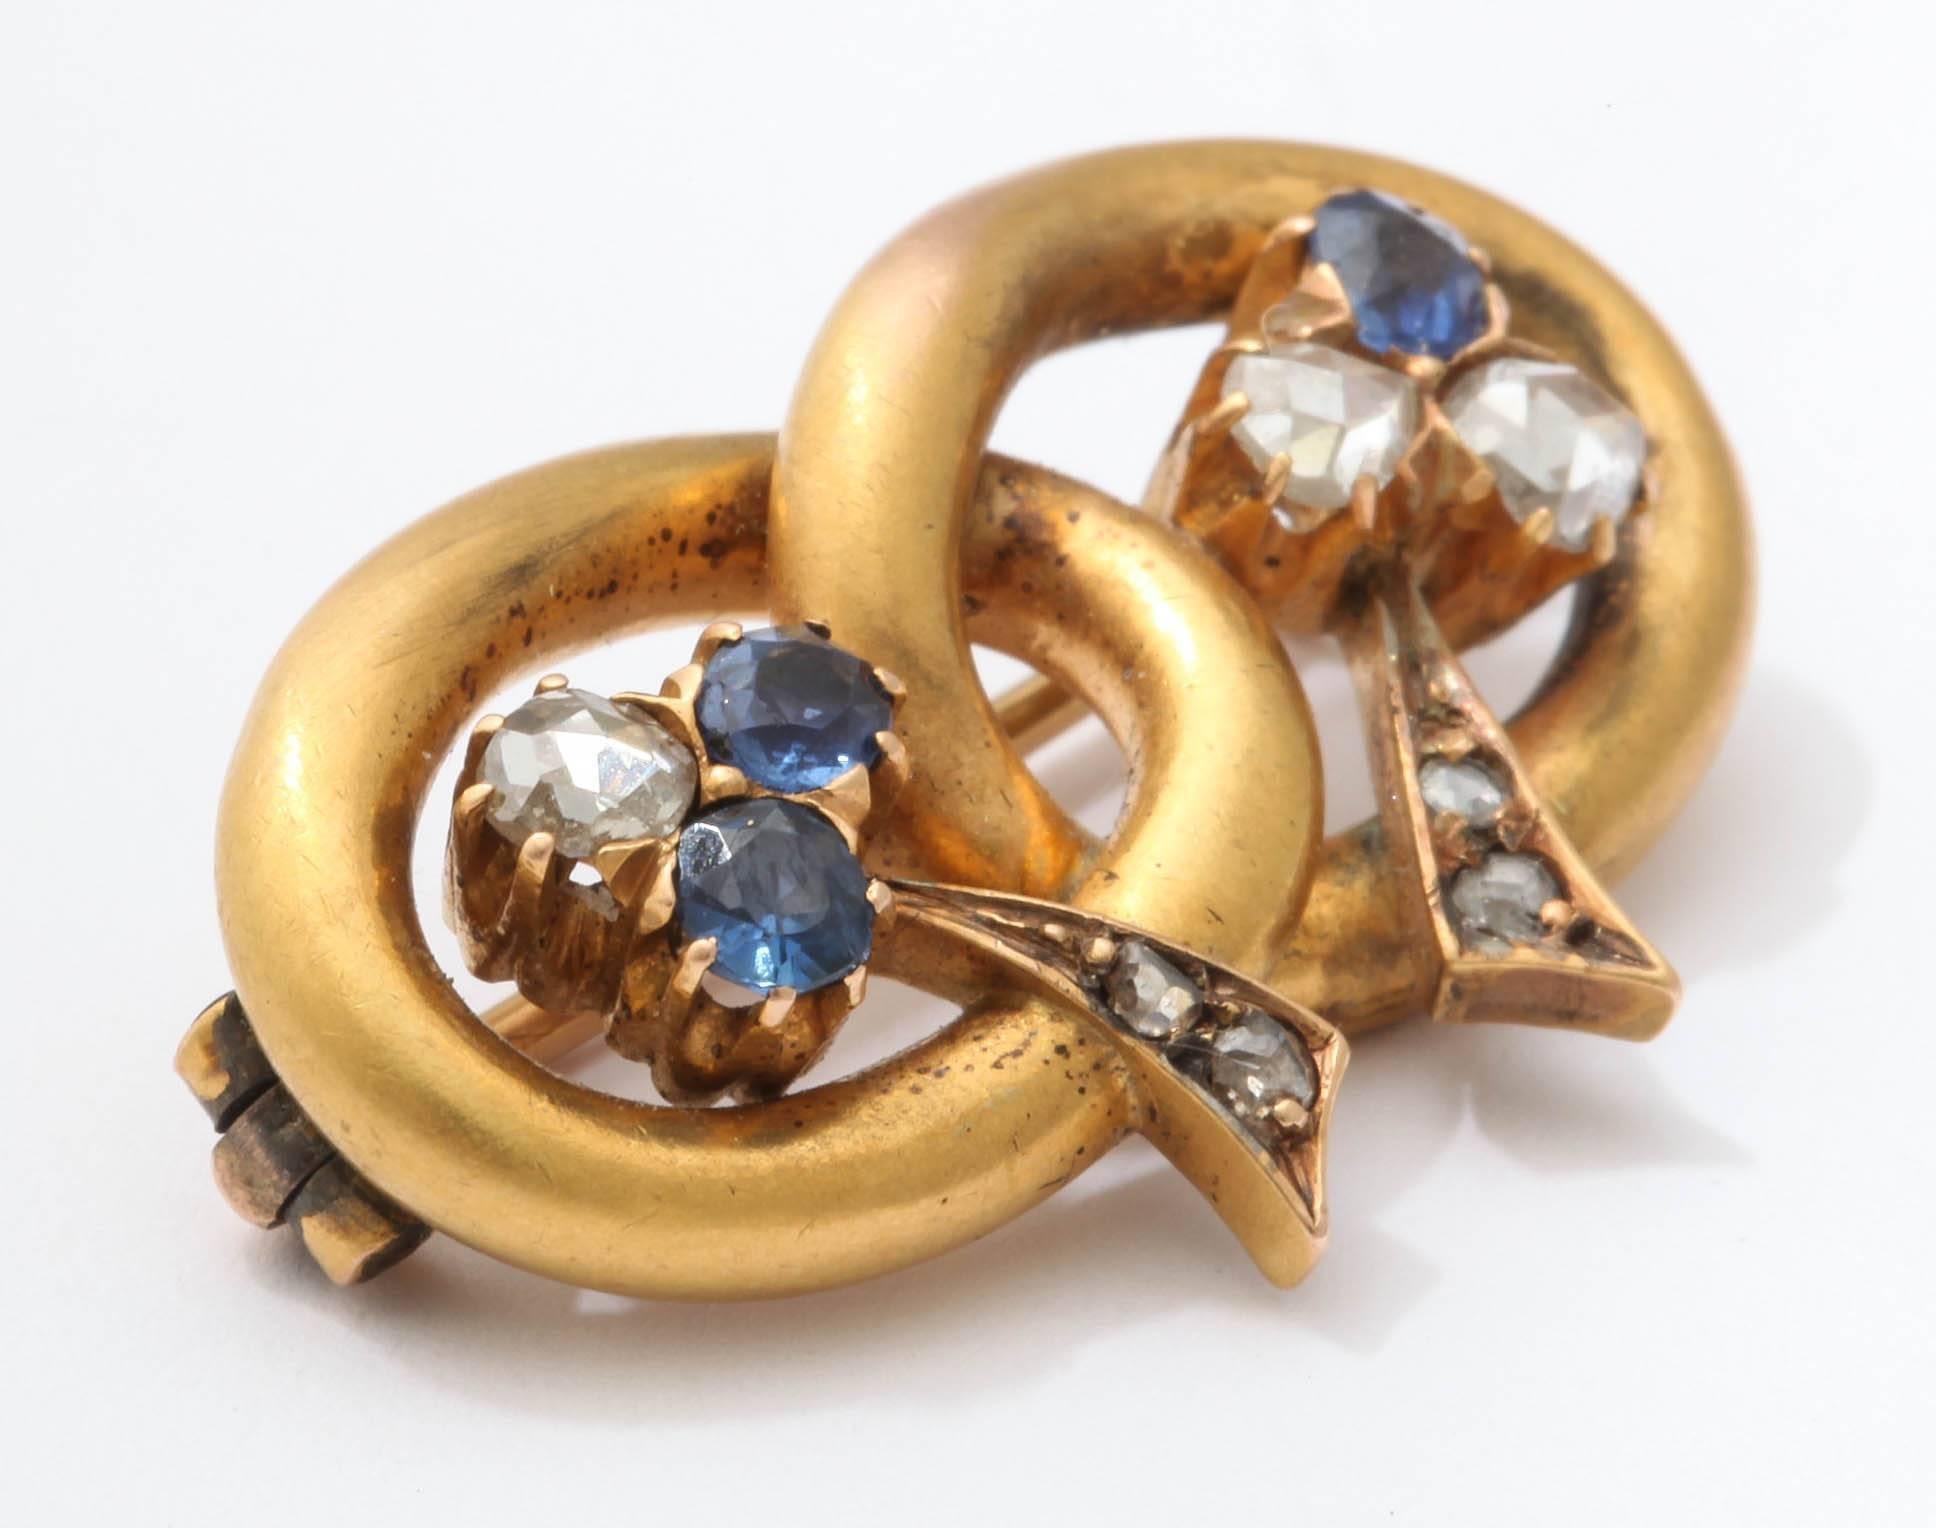 Rare Russian pin from the Romanov era, period of Tsar Nicholas II designed as a gold lover's knot, each loop set with a sapphire and diamond trefoil, its tapered stem set with rose diamonds.

By Vladimir Soloviev, St. Petersburg, 1899-1908.  

1 1/8